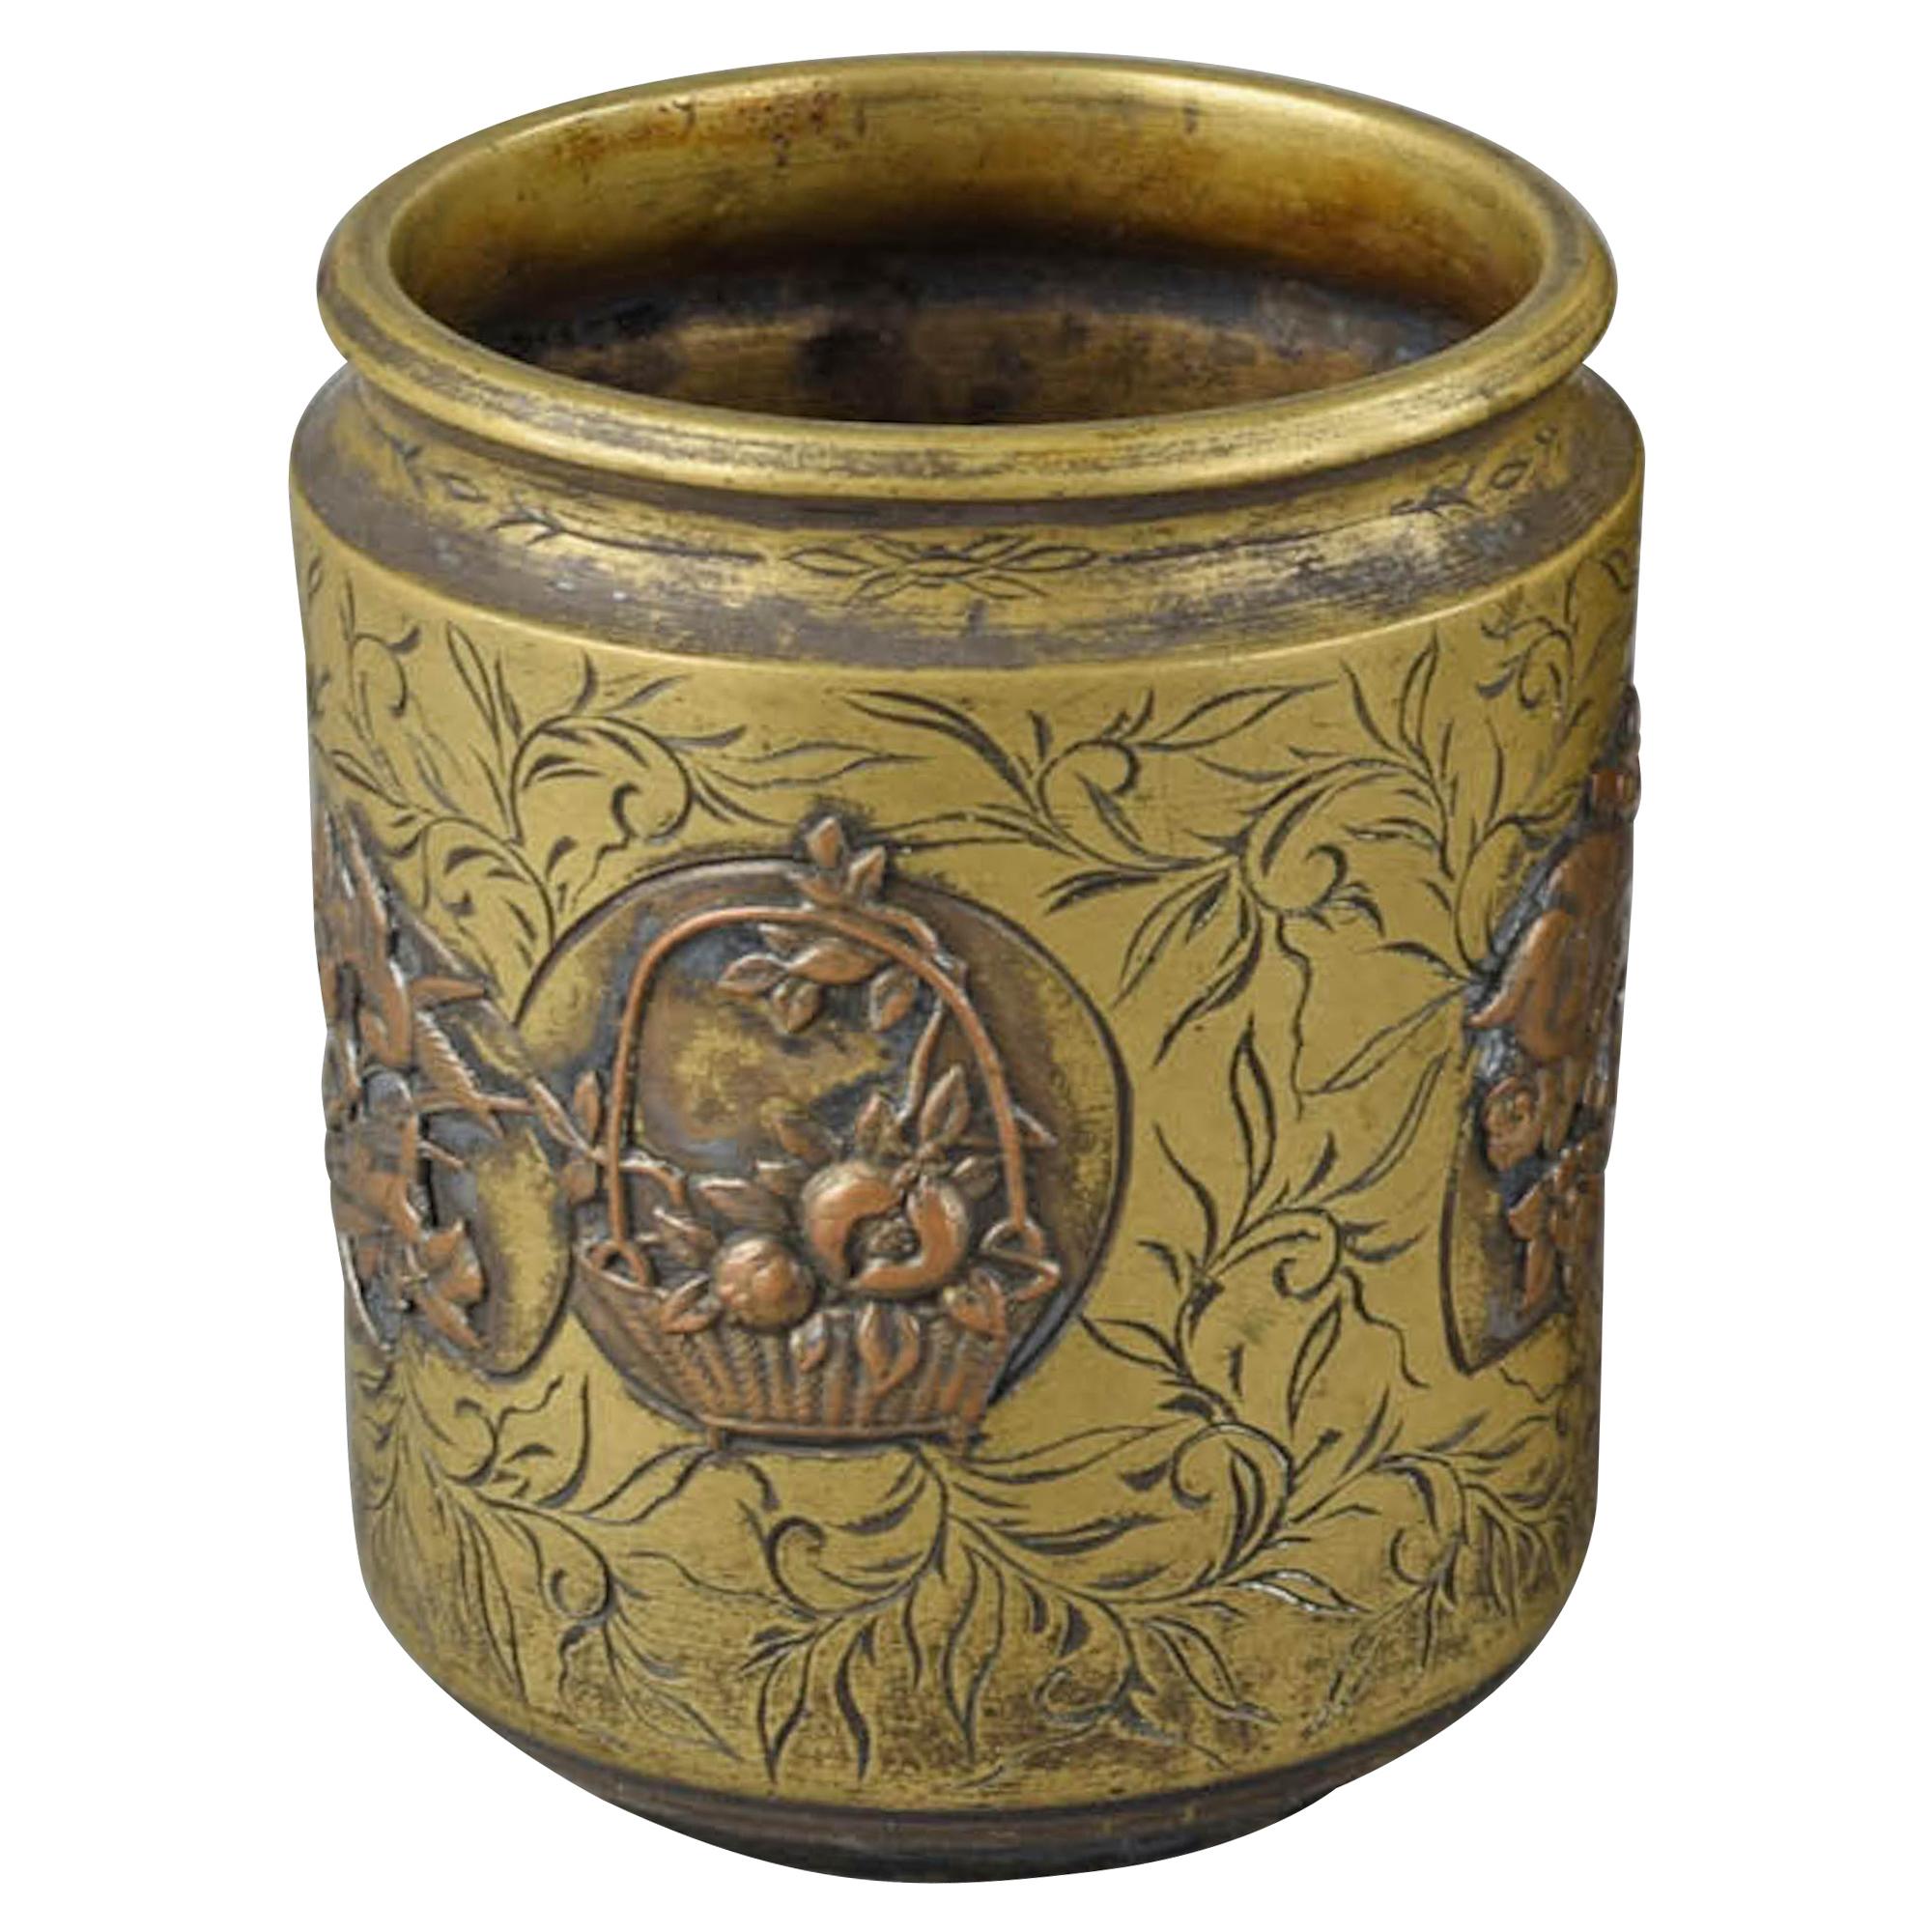 Vintage Asian Brass Mug, South-East Asia, Early 20th Century